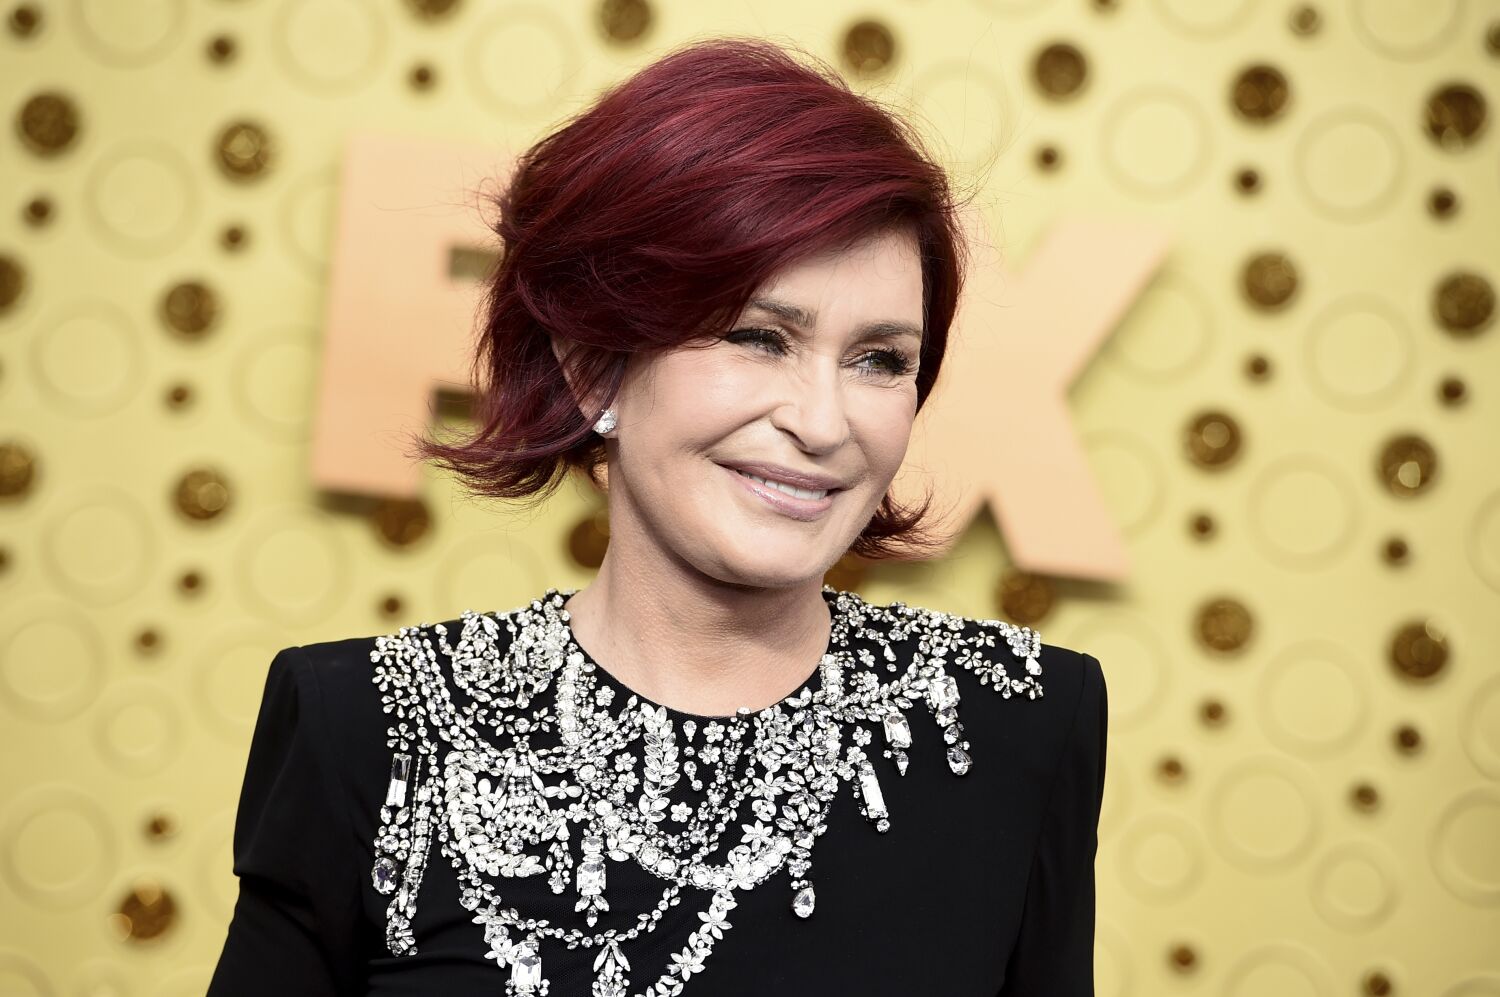 Even Sharon Osbourne doesn't know why she was hospitalized: 'It's still a mystery'